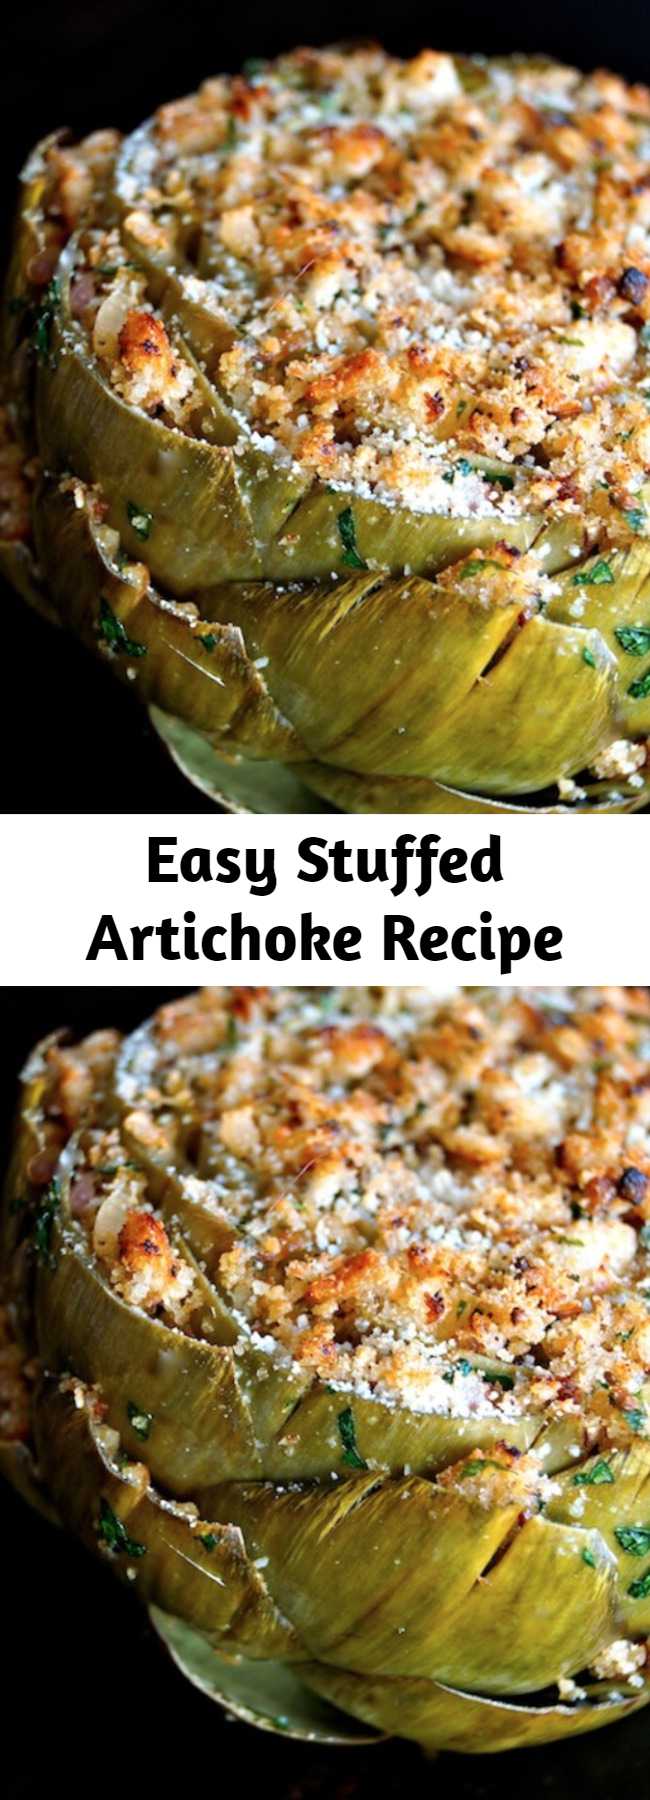 Easy Stuffed Artichoke Recipe - This Ultimate Stuffed Artichoke Recipe is packed with incredible, aromatic flavors and is out of this world. Serve it for a scrumptious vegetarian first or main course. And it's great for sharing too!